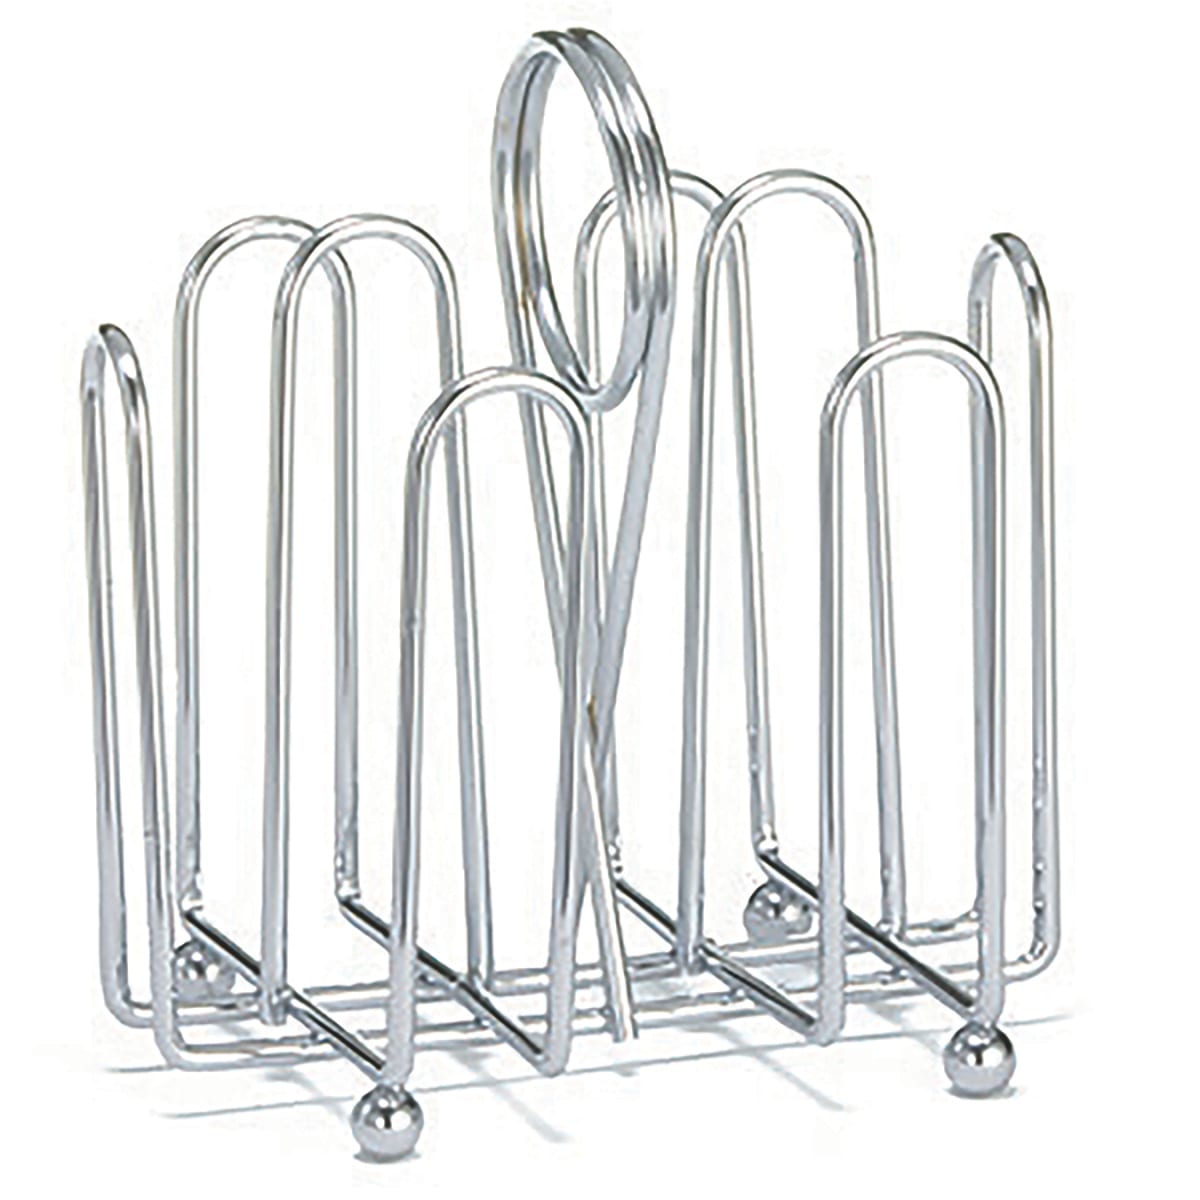 TableCraft 597C Chrome Plated Wire Jelly Packet Rack for 20 Packs ...